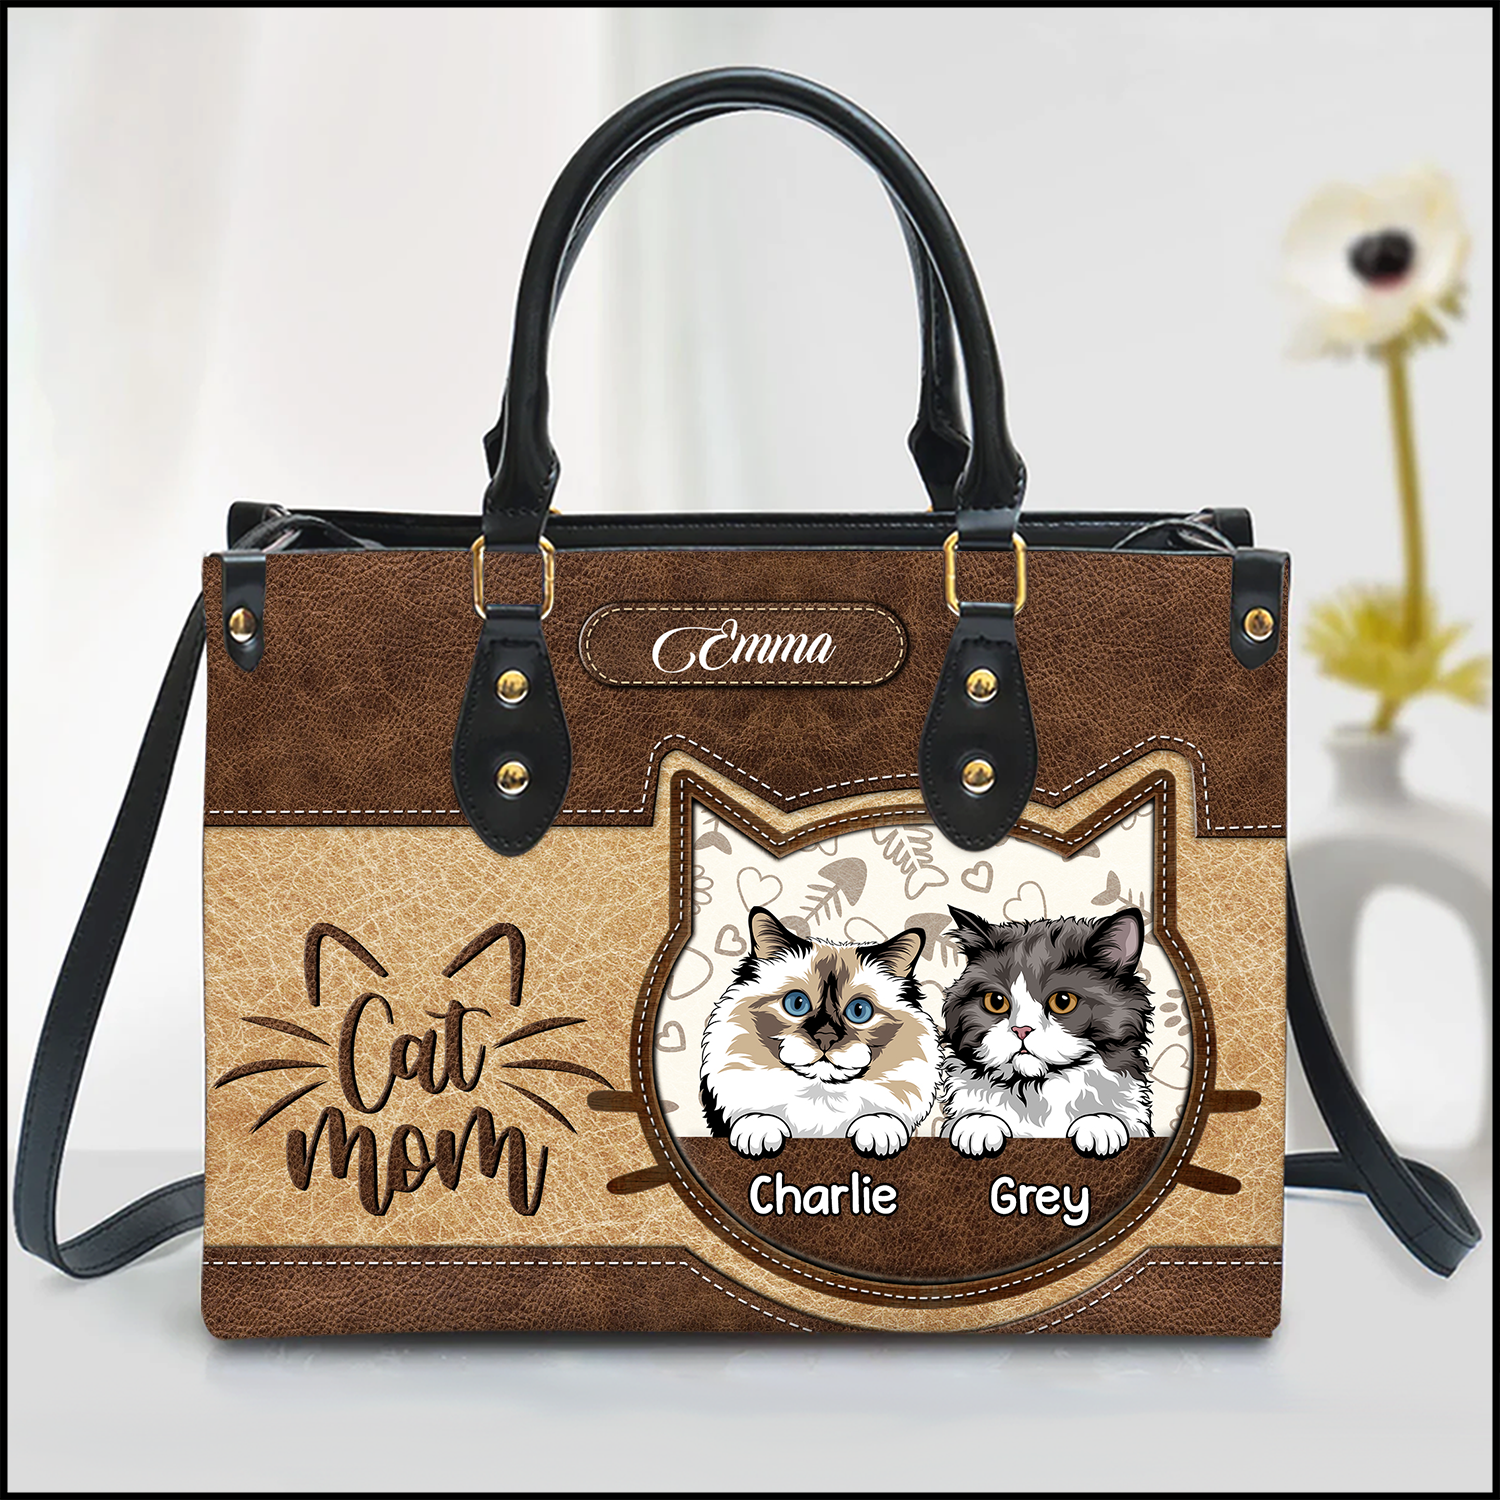 Cute Cat Kitten Pet Personalized Leather Handbag Purrfect Gift for Cat Mom HTN02FEB24KL2